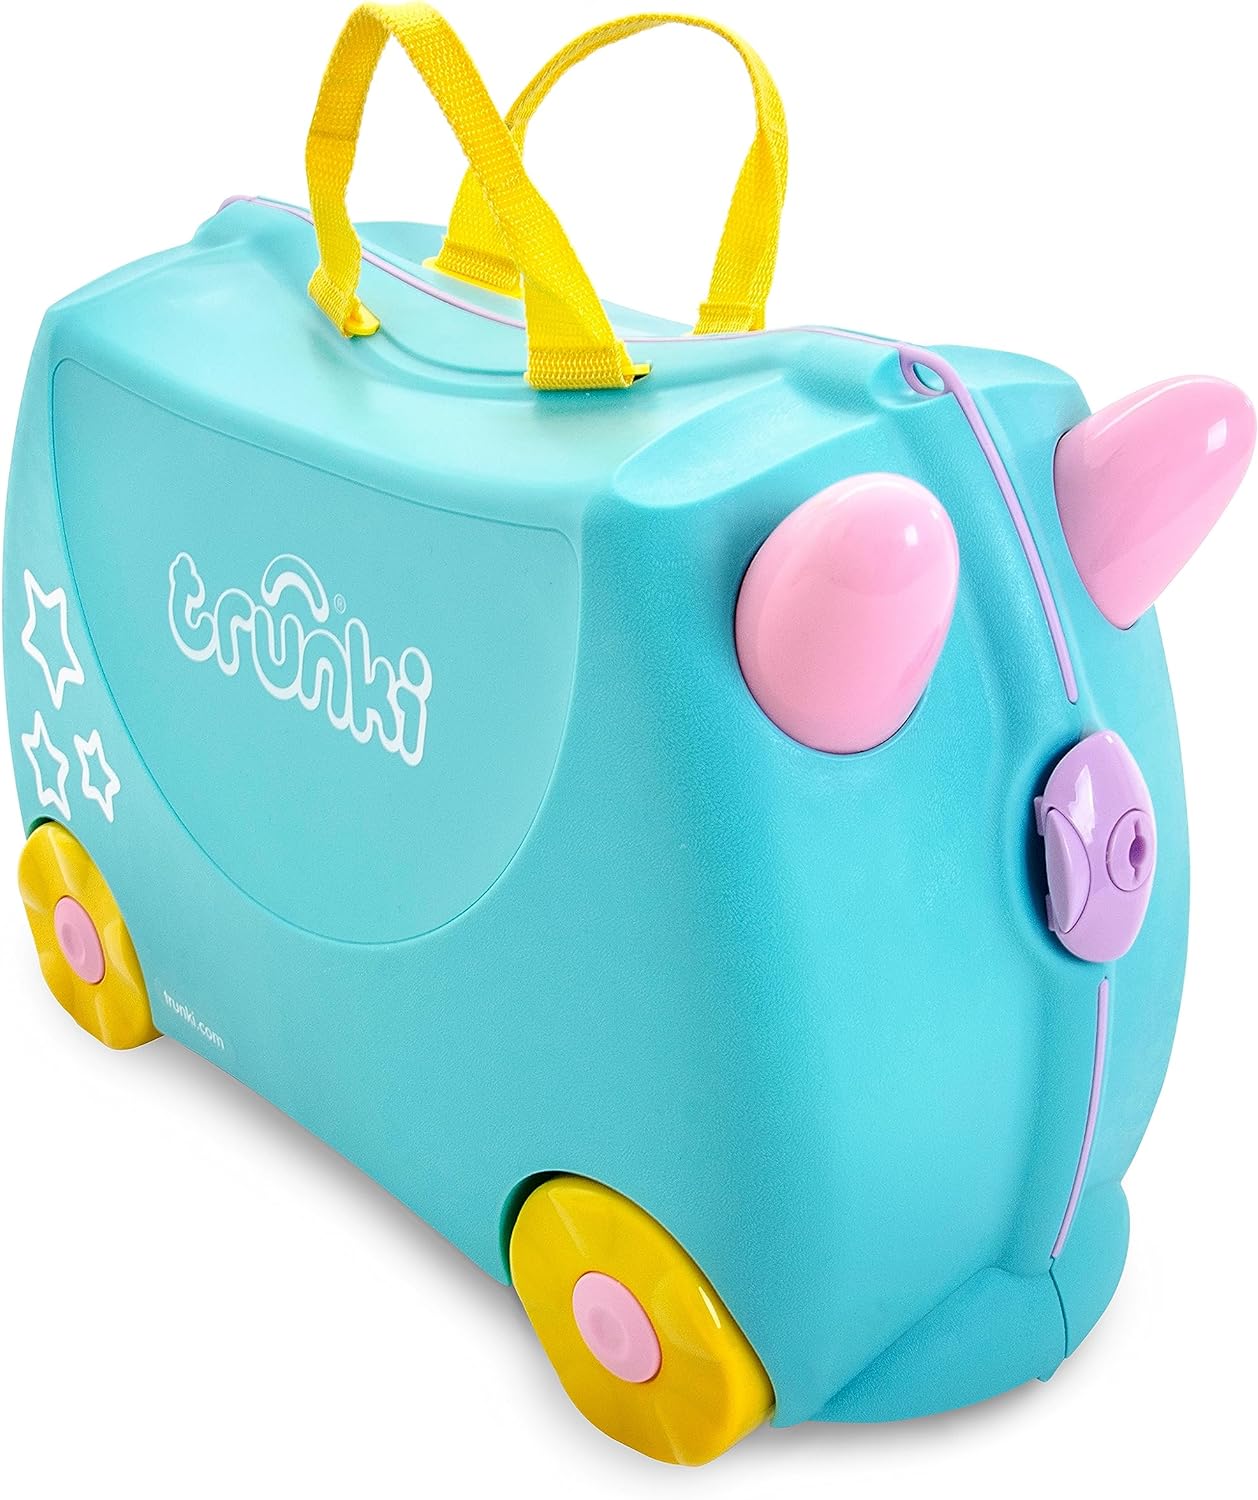 7. The Trunki Ride-on Luggage